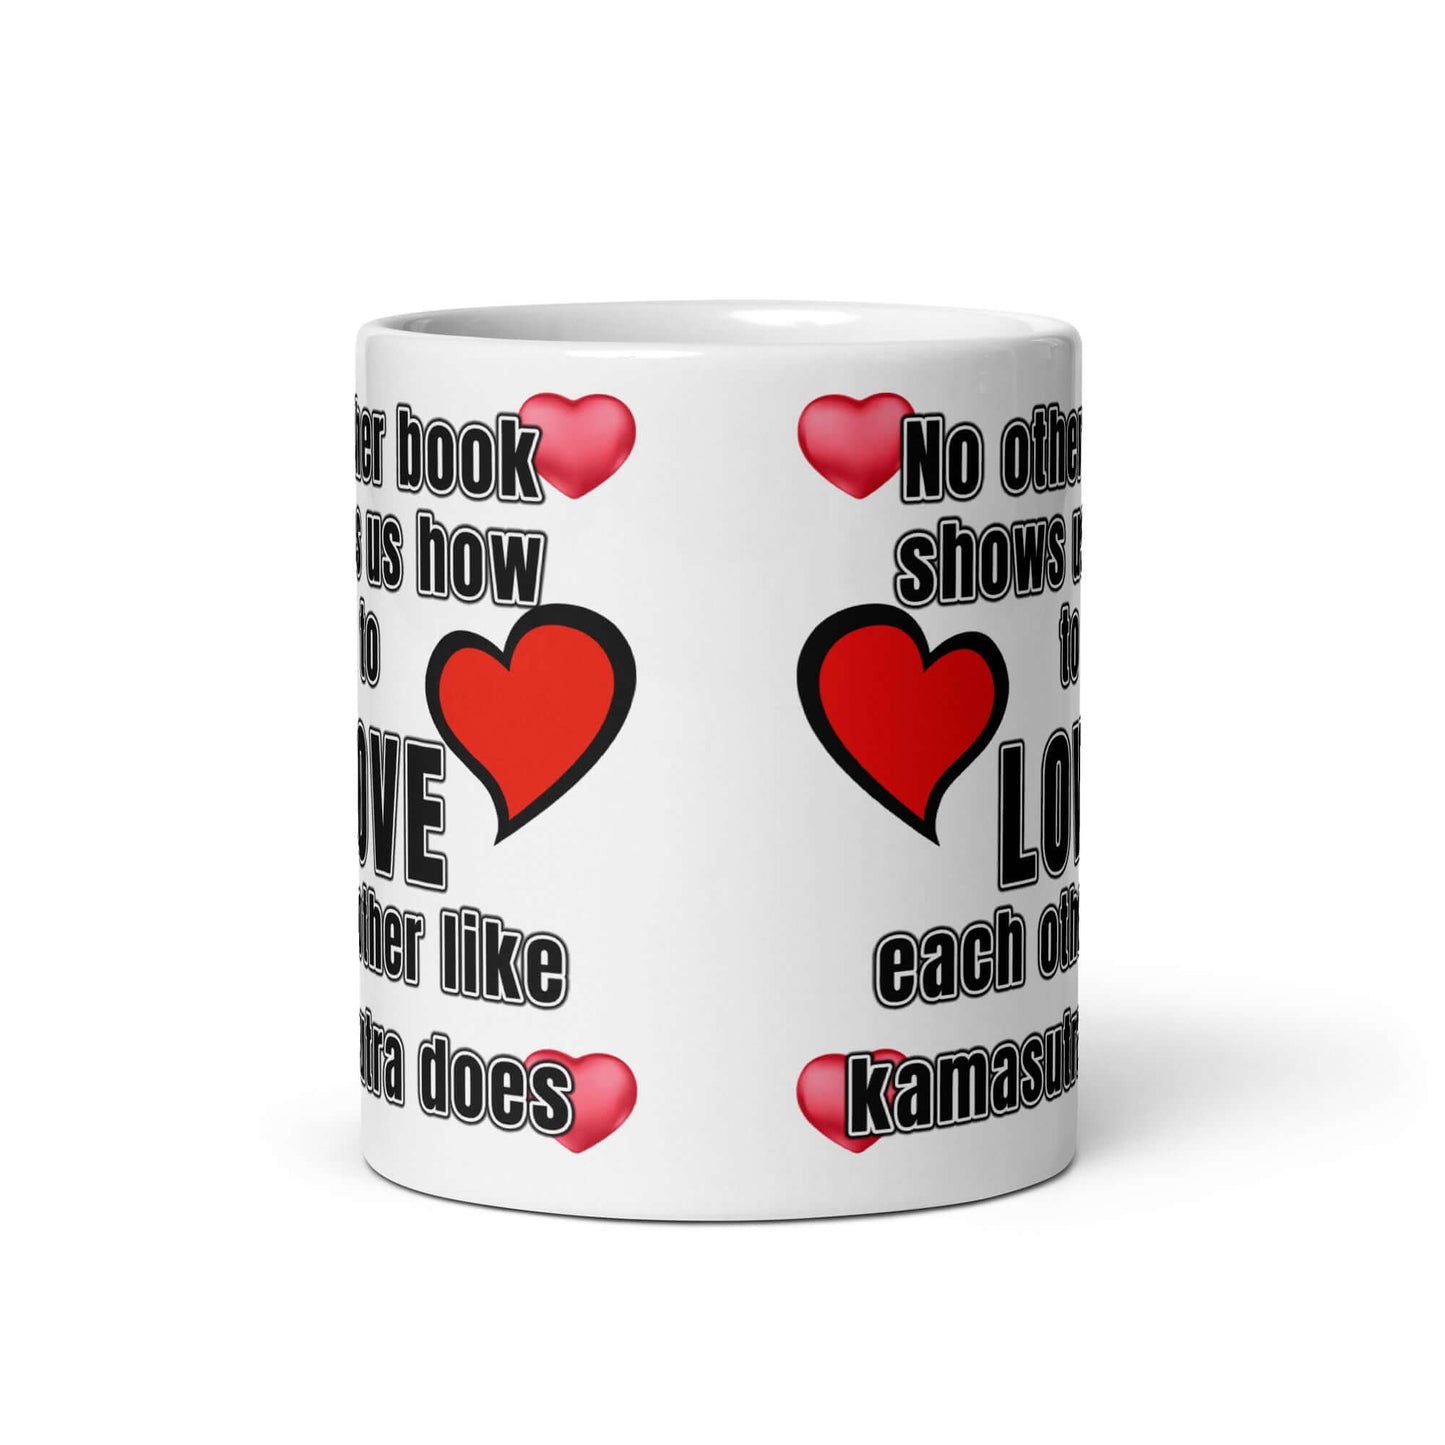 No other book shows us how to love each other like the Kamasutra does - White glossy mug - Horrible Designs